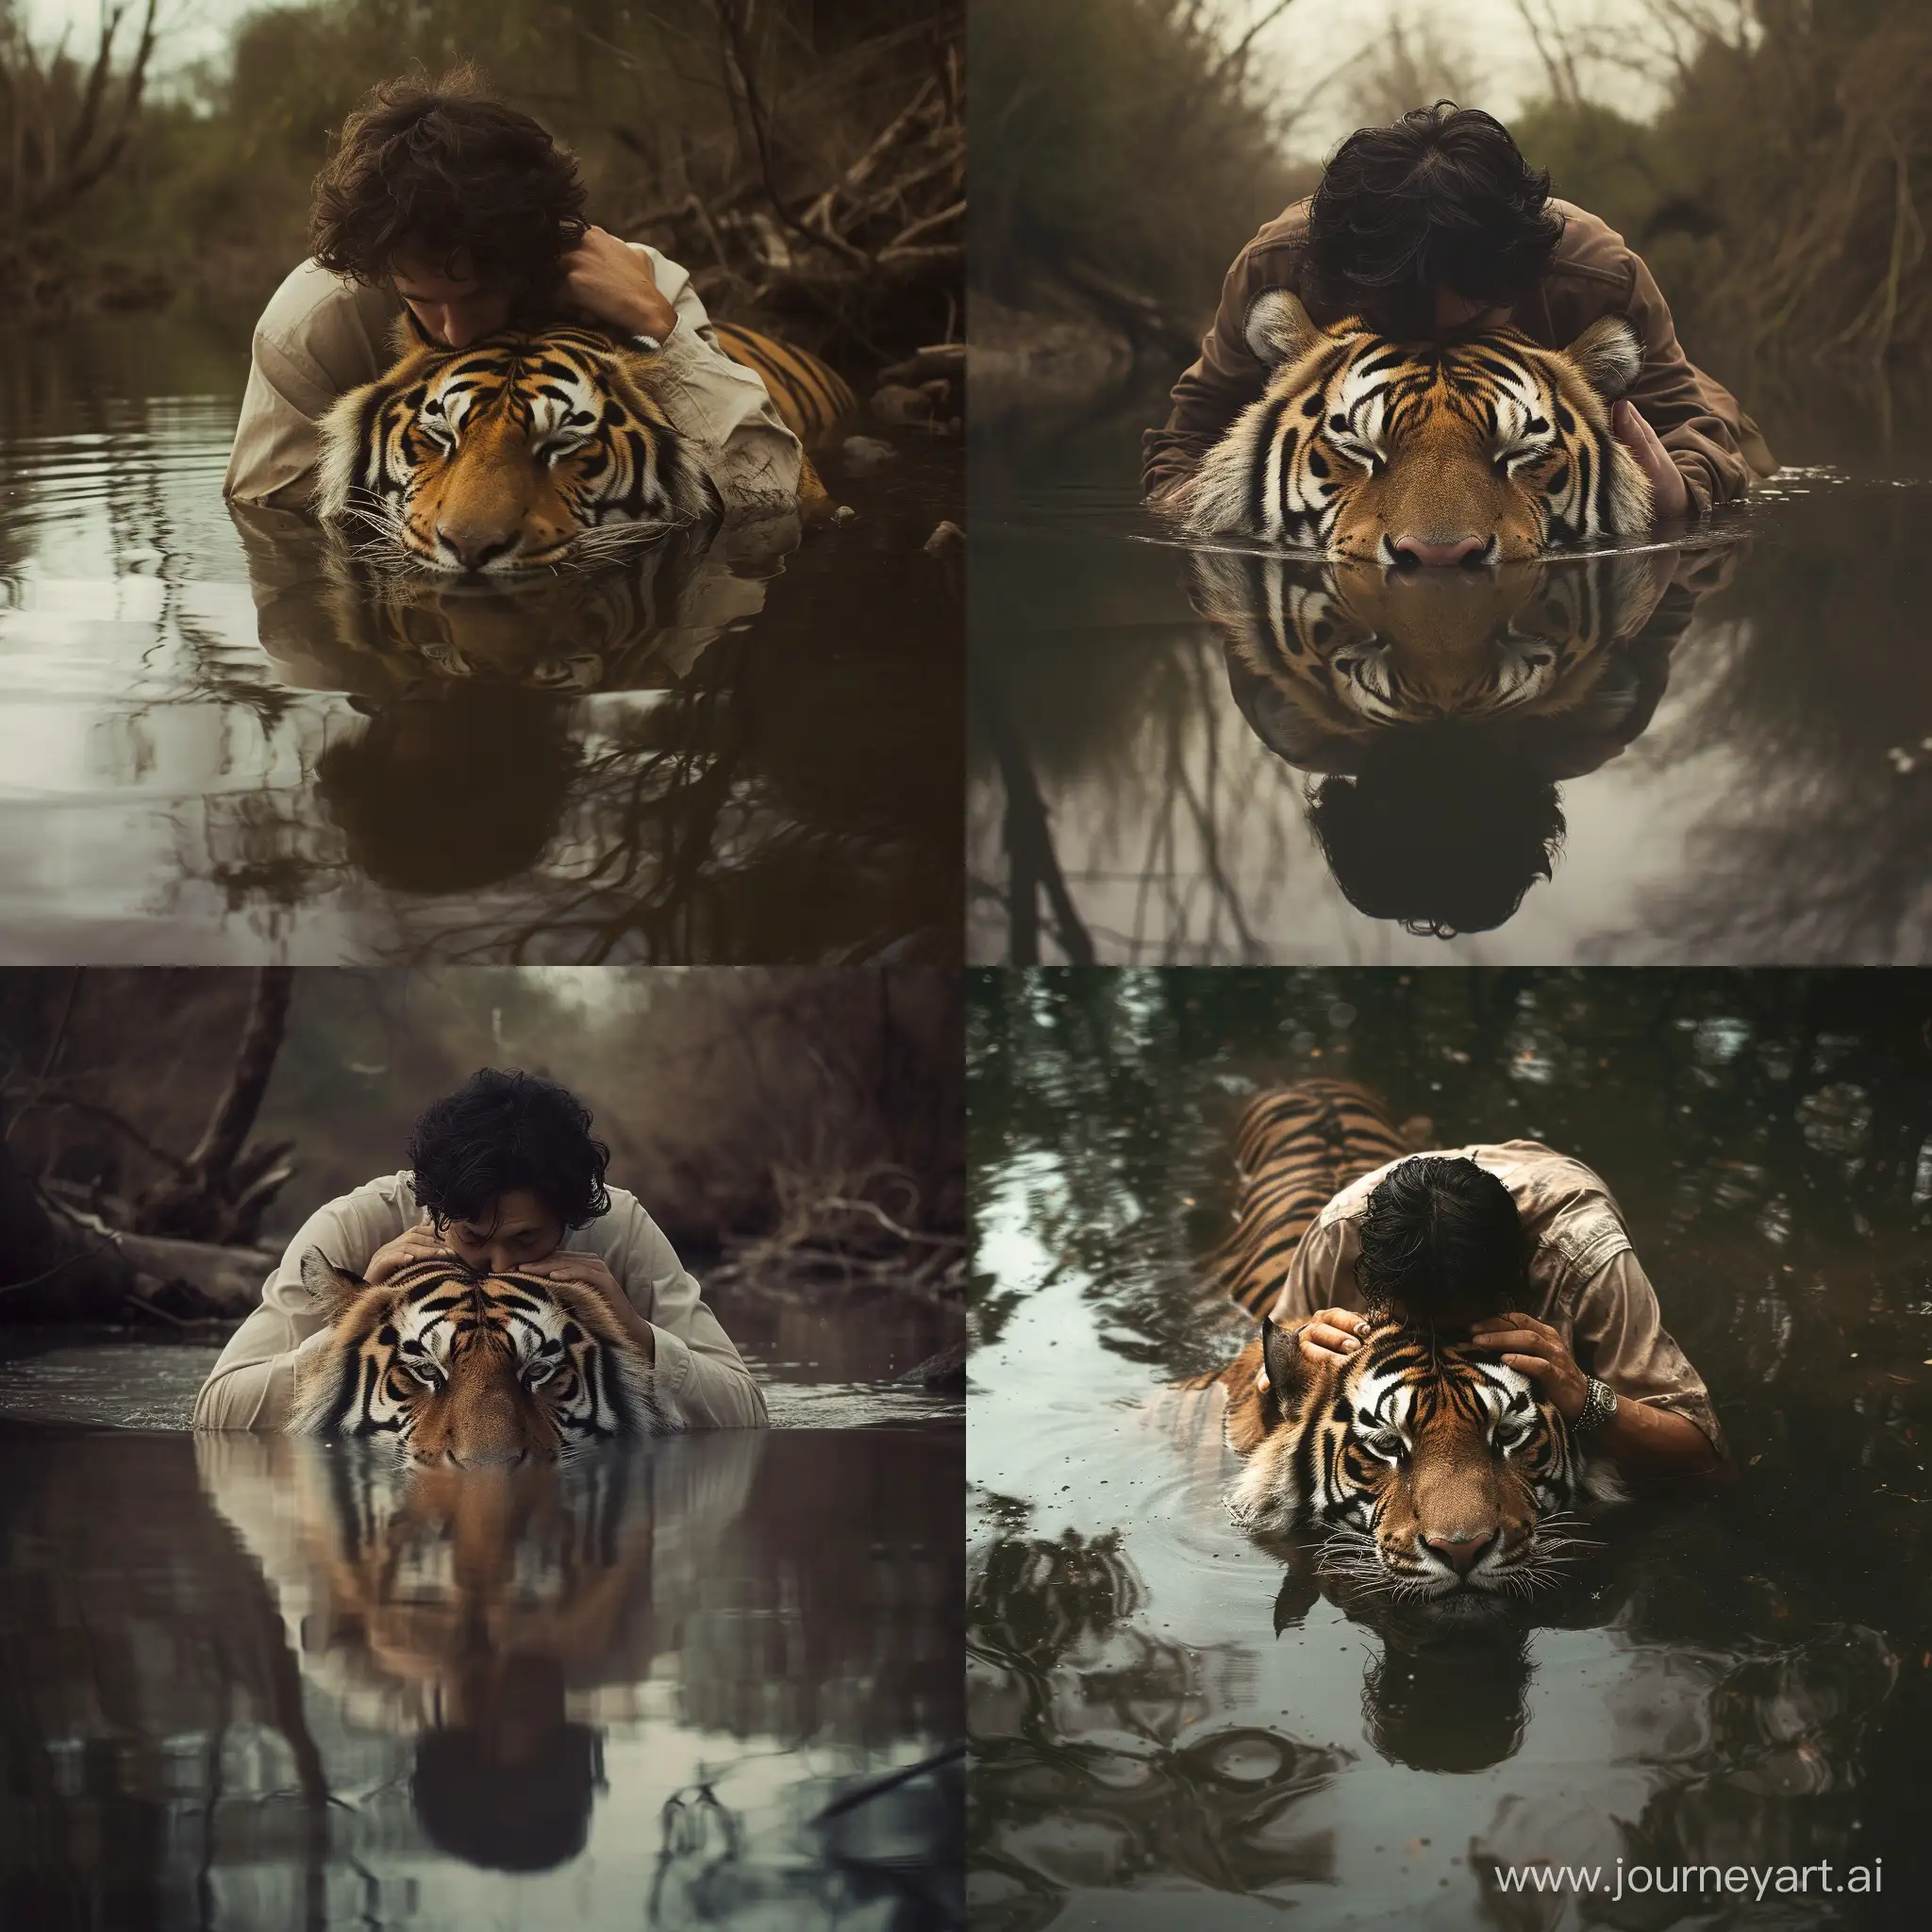 Man with tiger inside river The man places his head on the tiger's head with reflections on the river